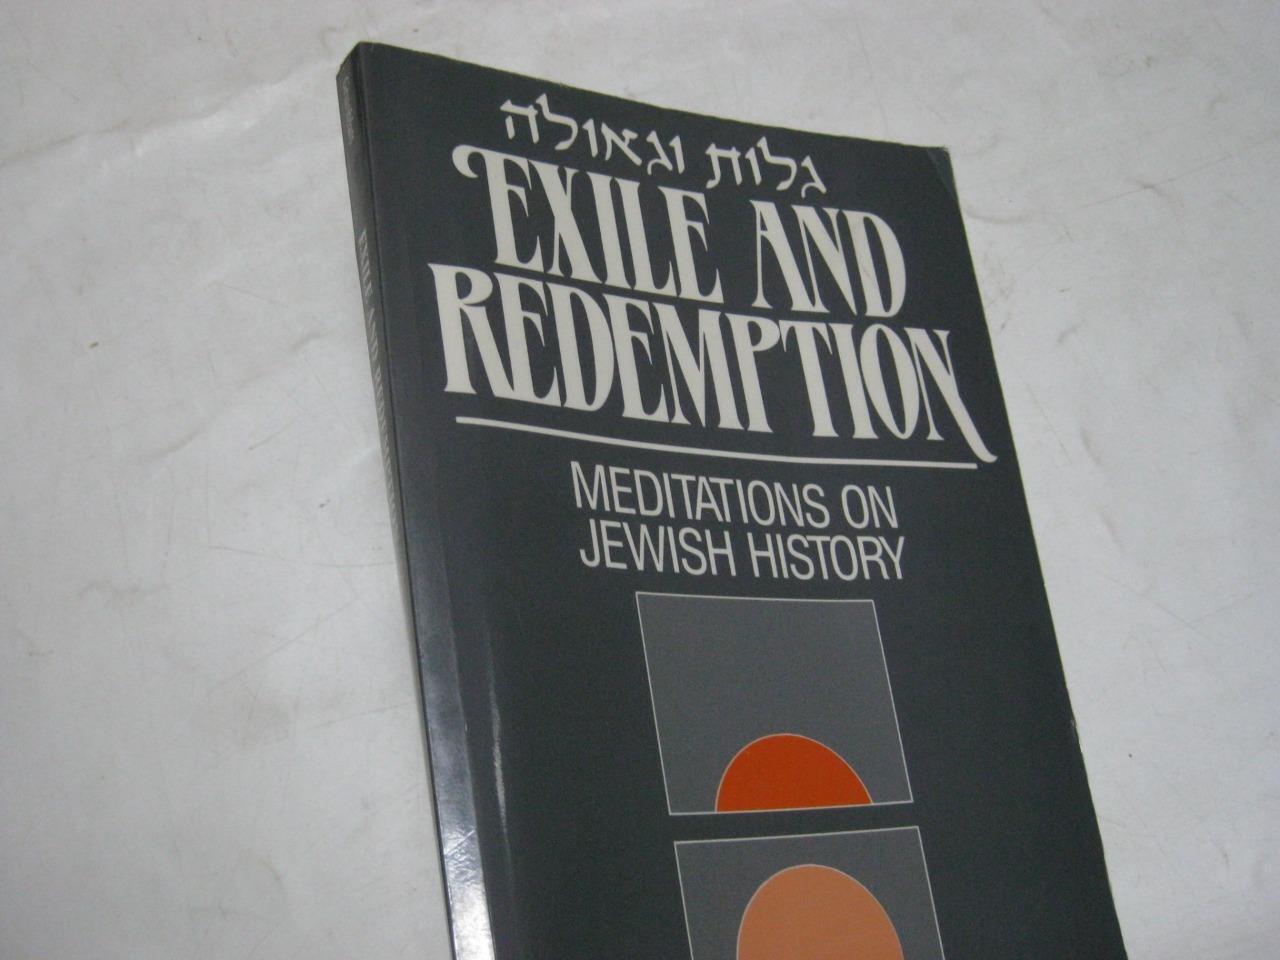 Exile and Redemption: Meditations on Jewish History by Joseph Grunblatt